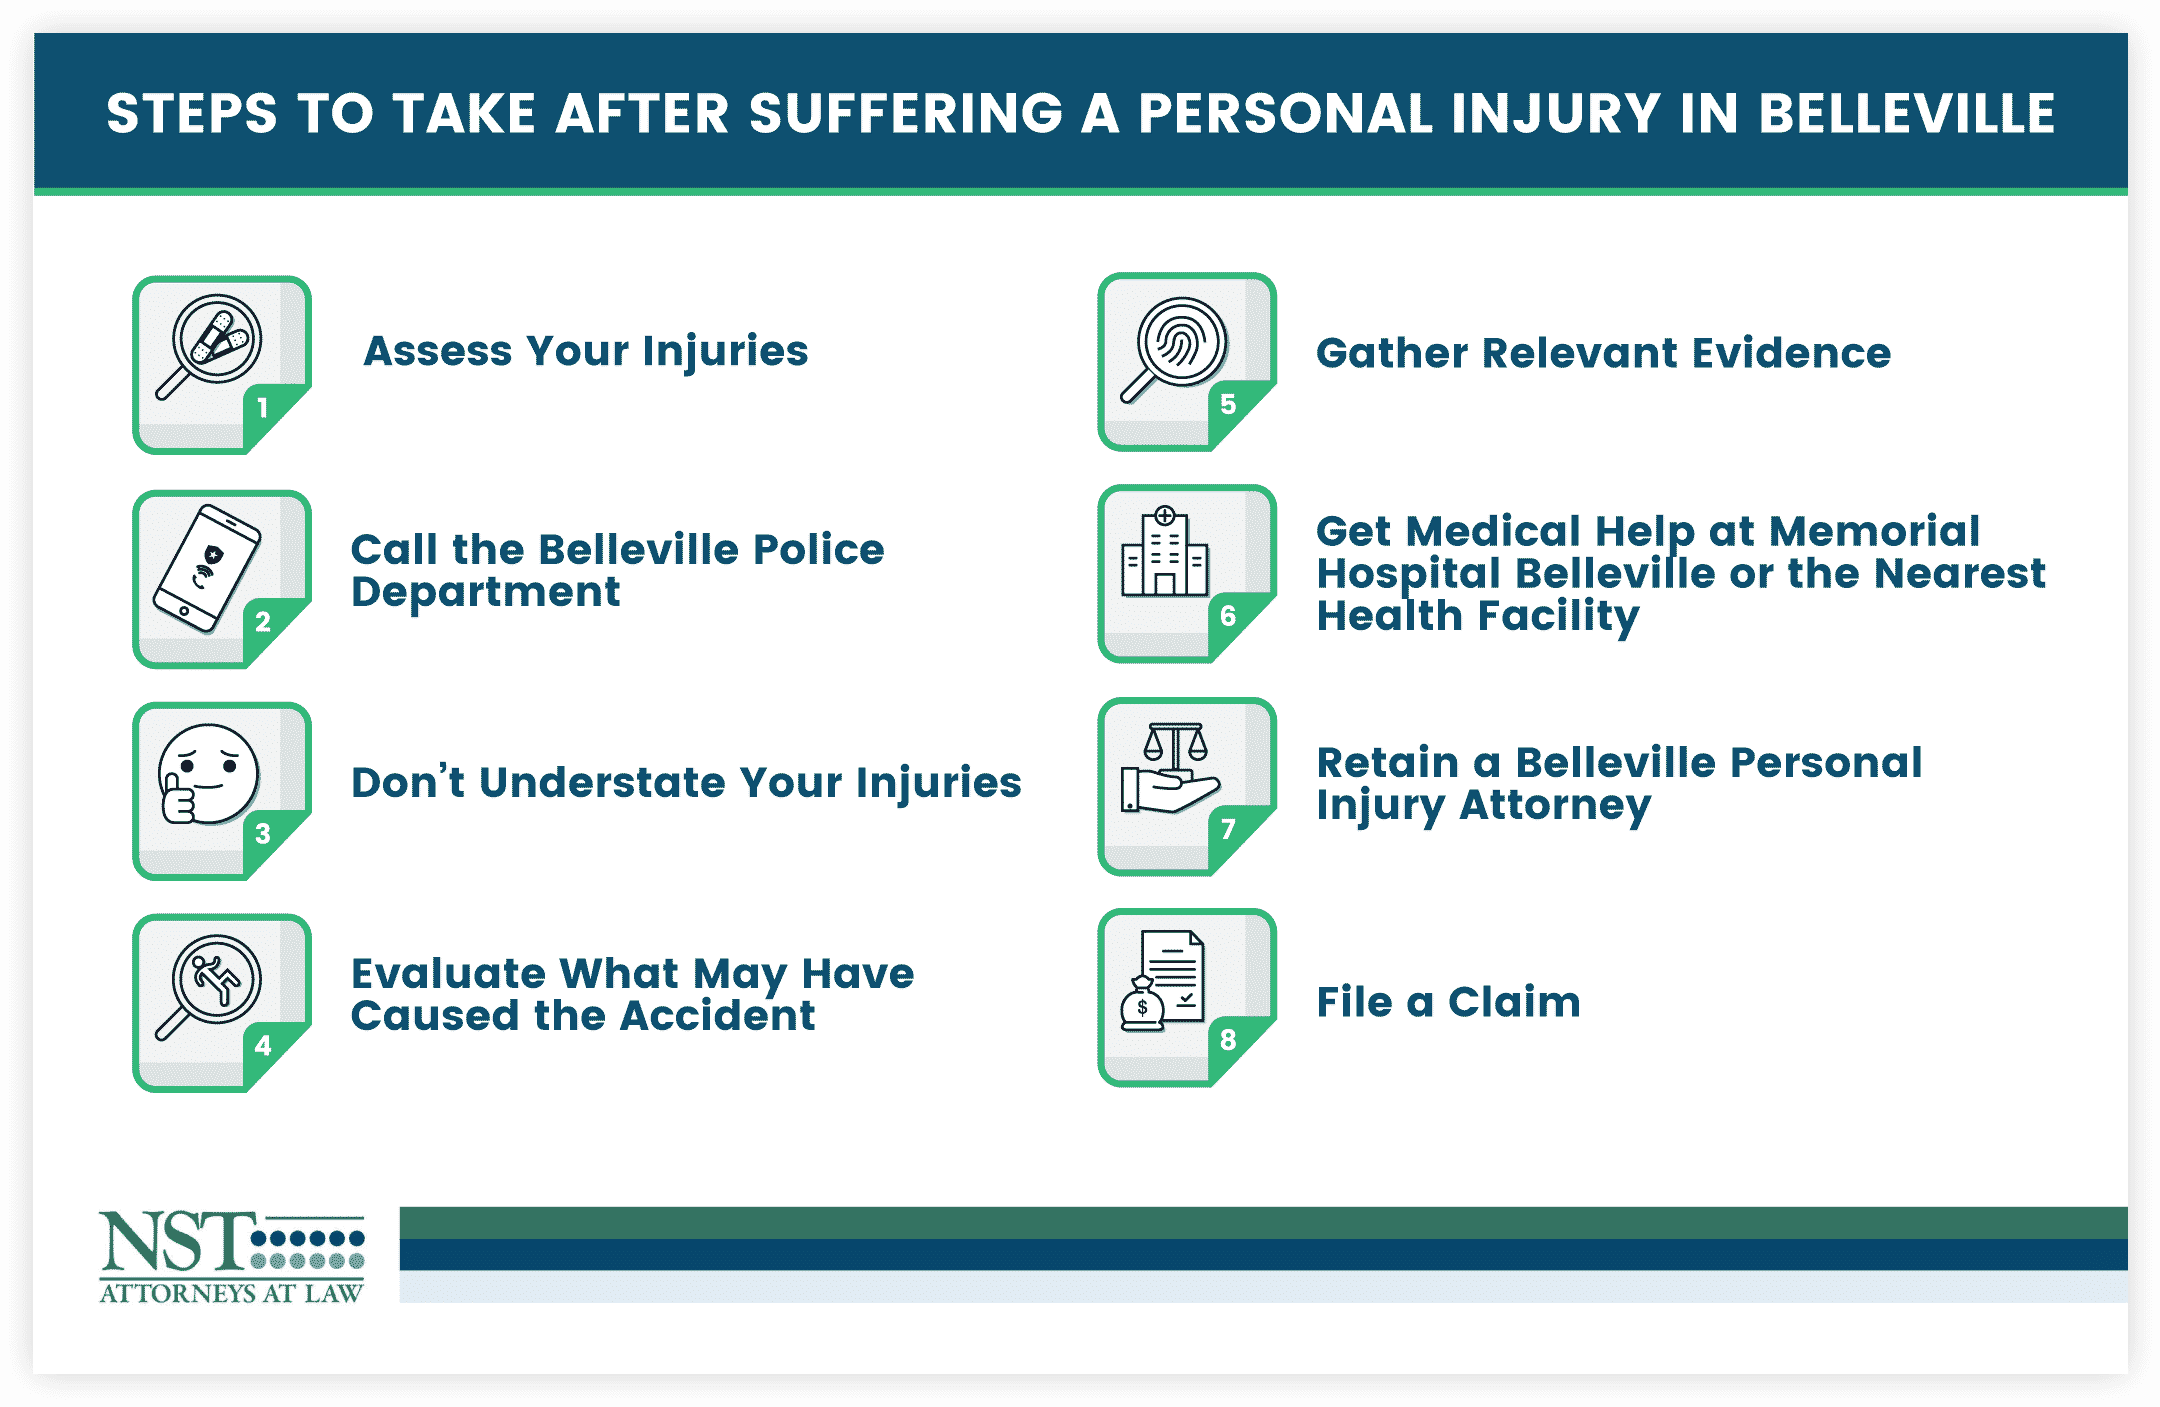 Steps to Take After Suffering a Personal Injury in Belleville infographic